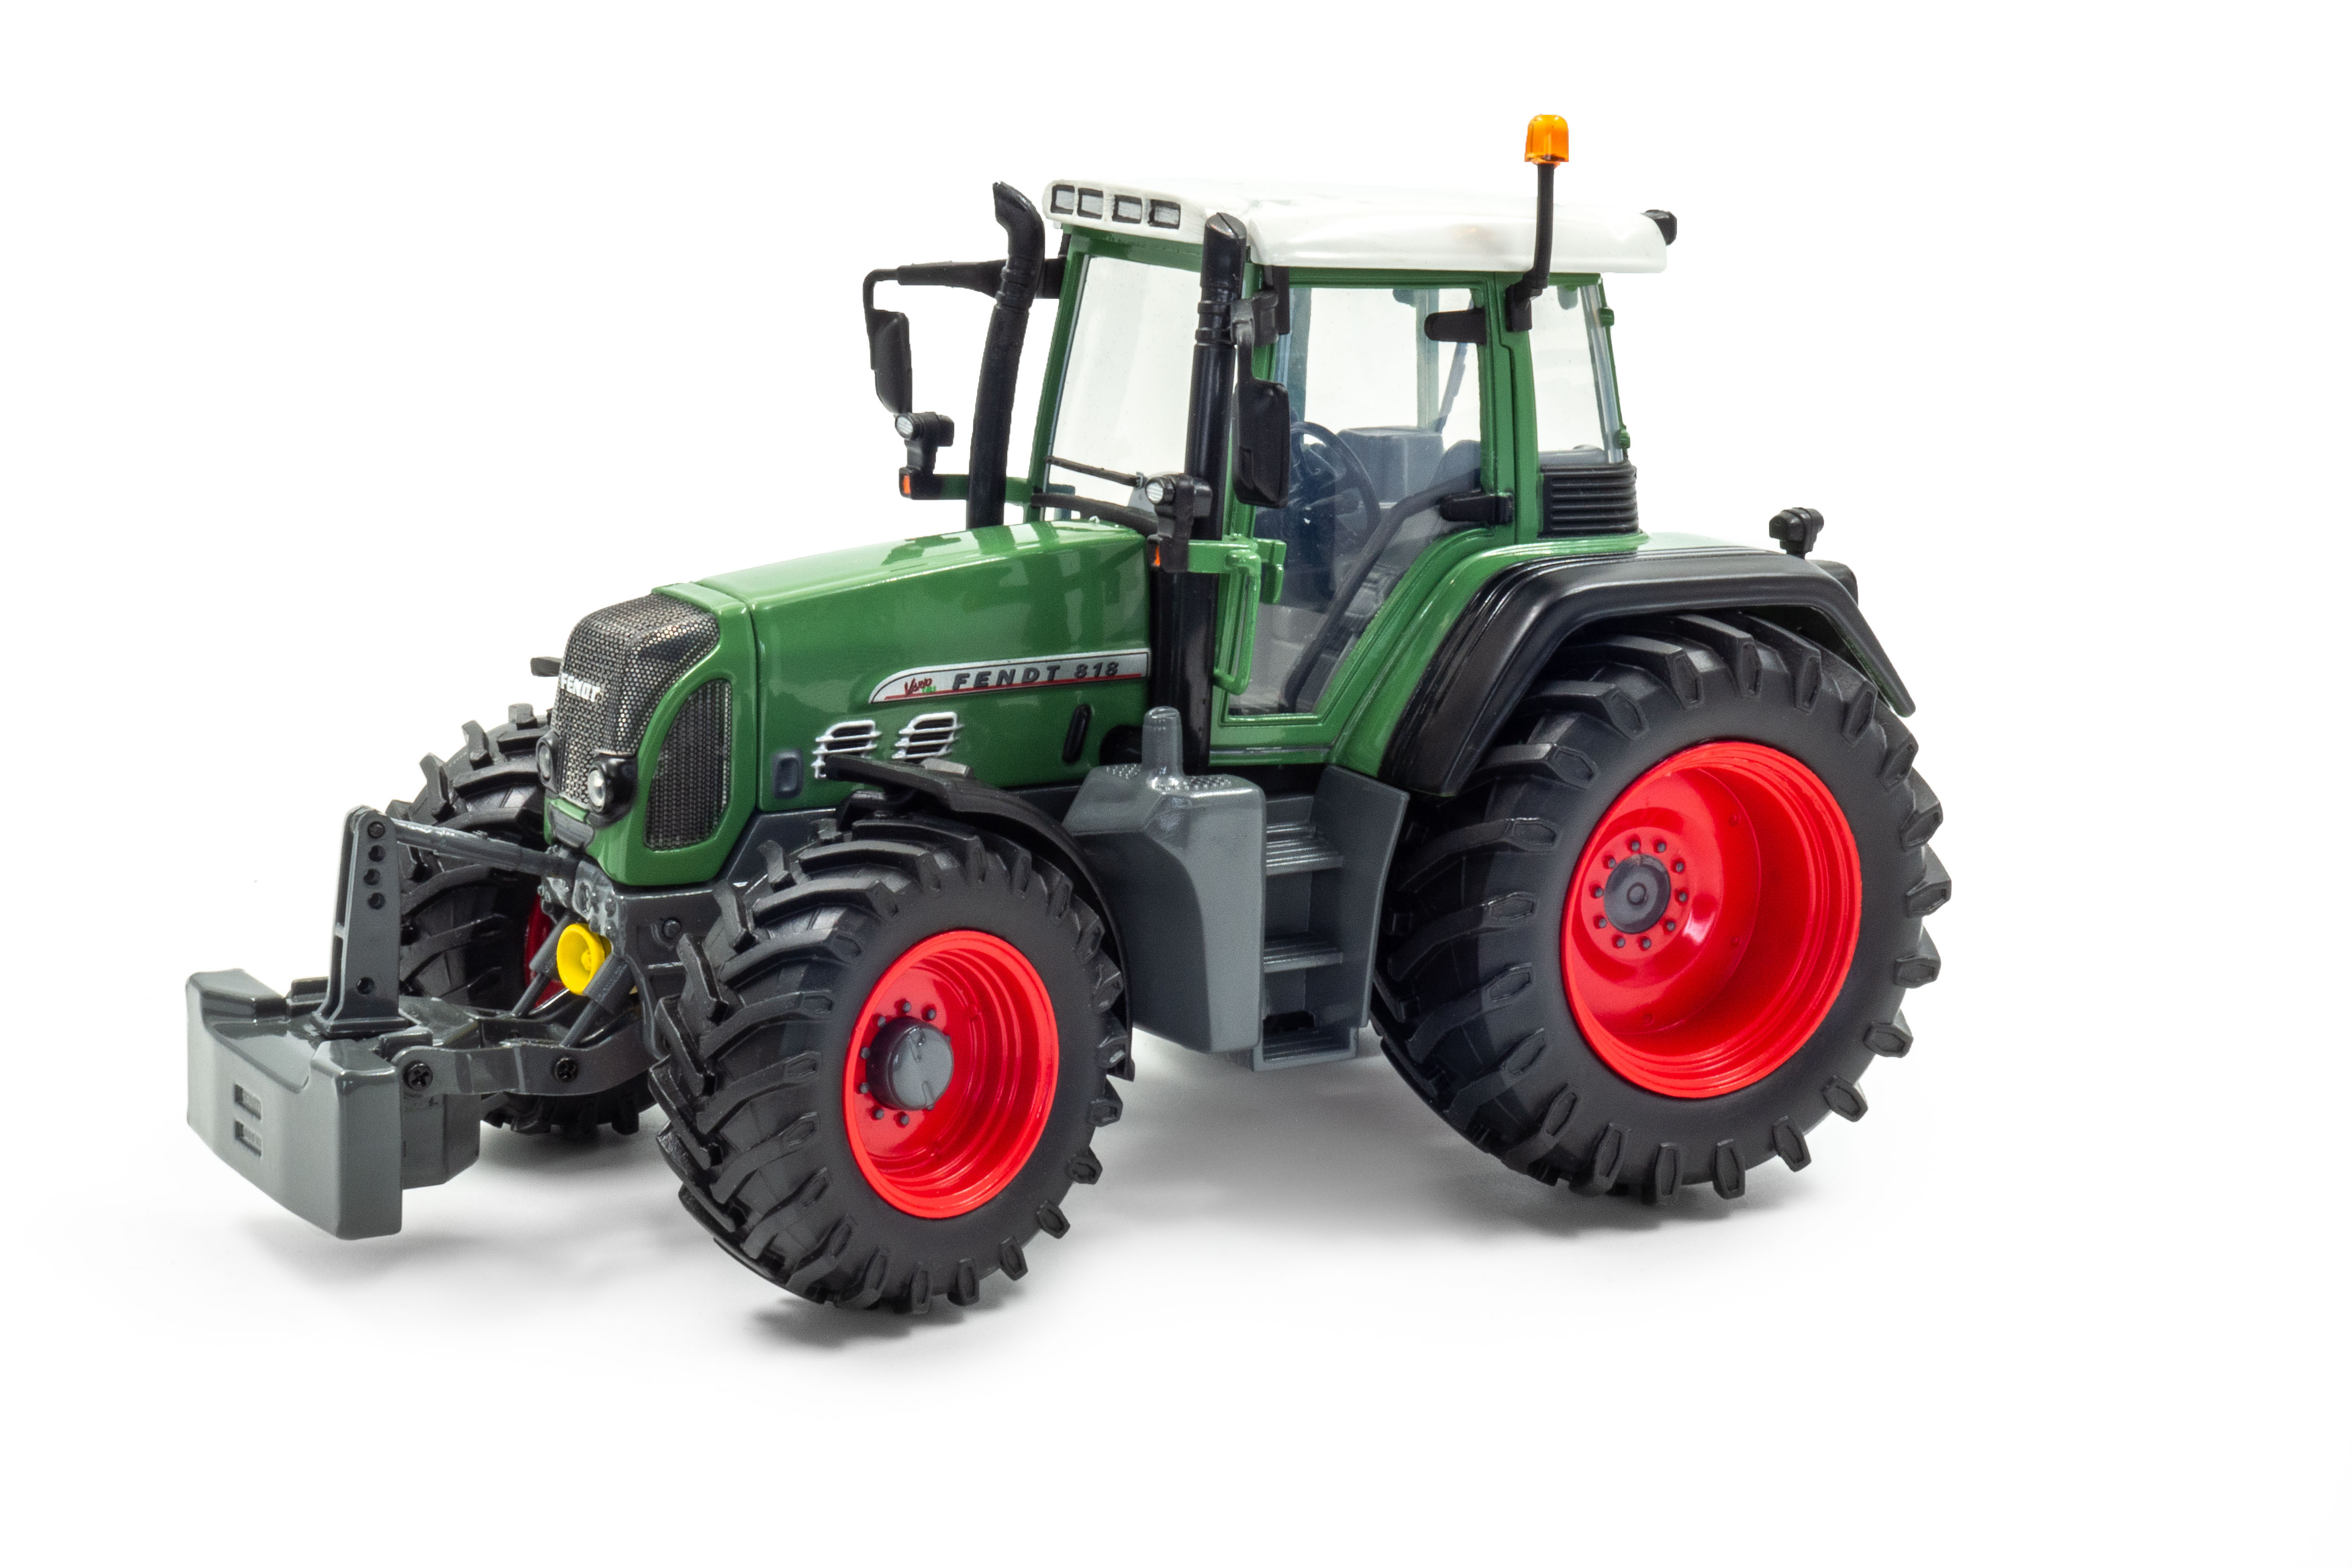 Fendt 818 with Wide tyres - Limited Edition 999 pieces